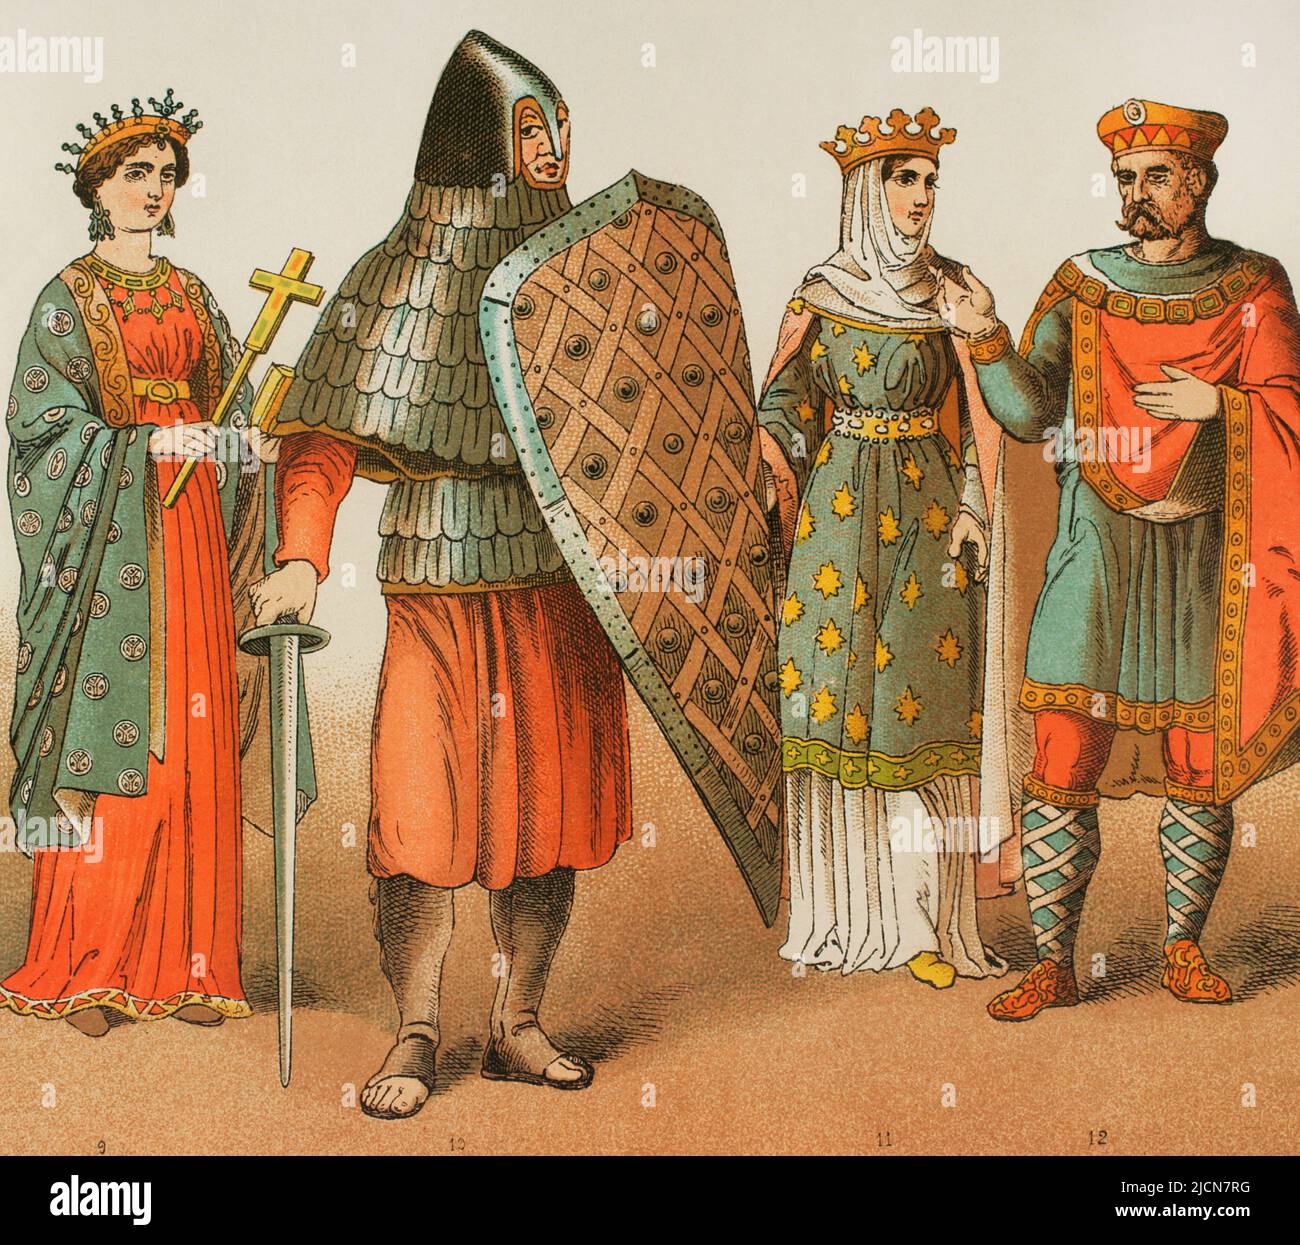 Europe. Early Middle Ages. 8th-9th centuries. Frankish Kingdom. Carolingian dynasty. From left to right. 9: Empress of 800, 19: Warrior, 11: Princess, 12: Charlemagne. Chromolithography. 'Historia Universal' (Universal History), by César Cantú. Volume IV. Published in Barcelona, 1881. Stock Photo